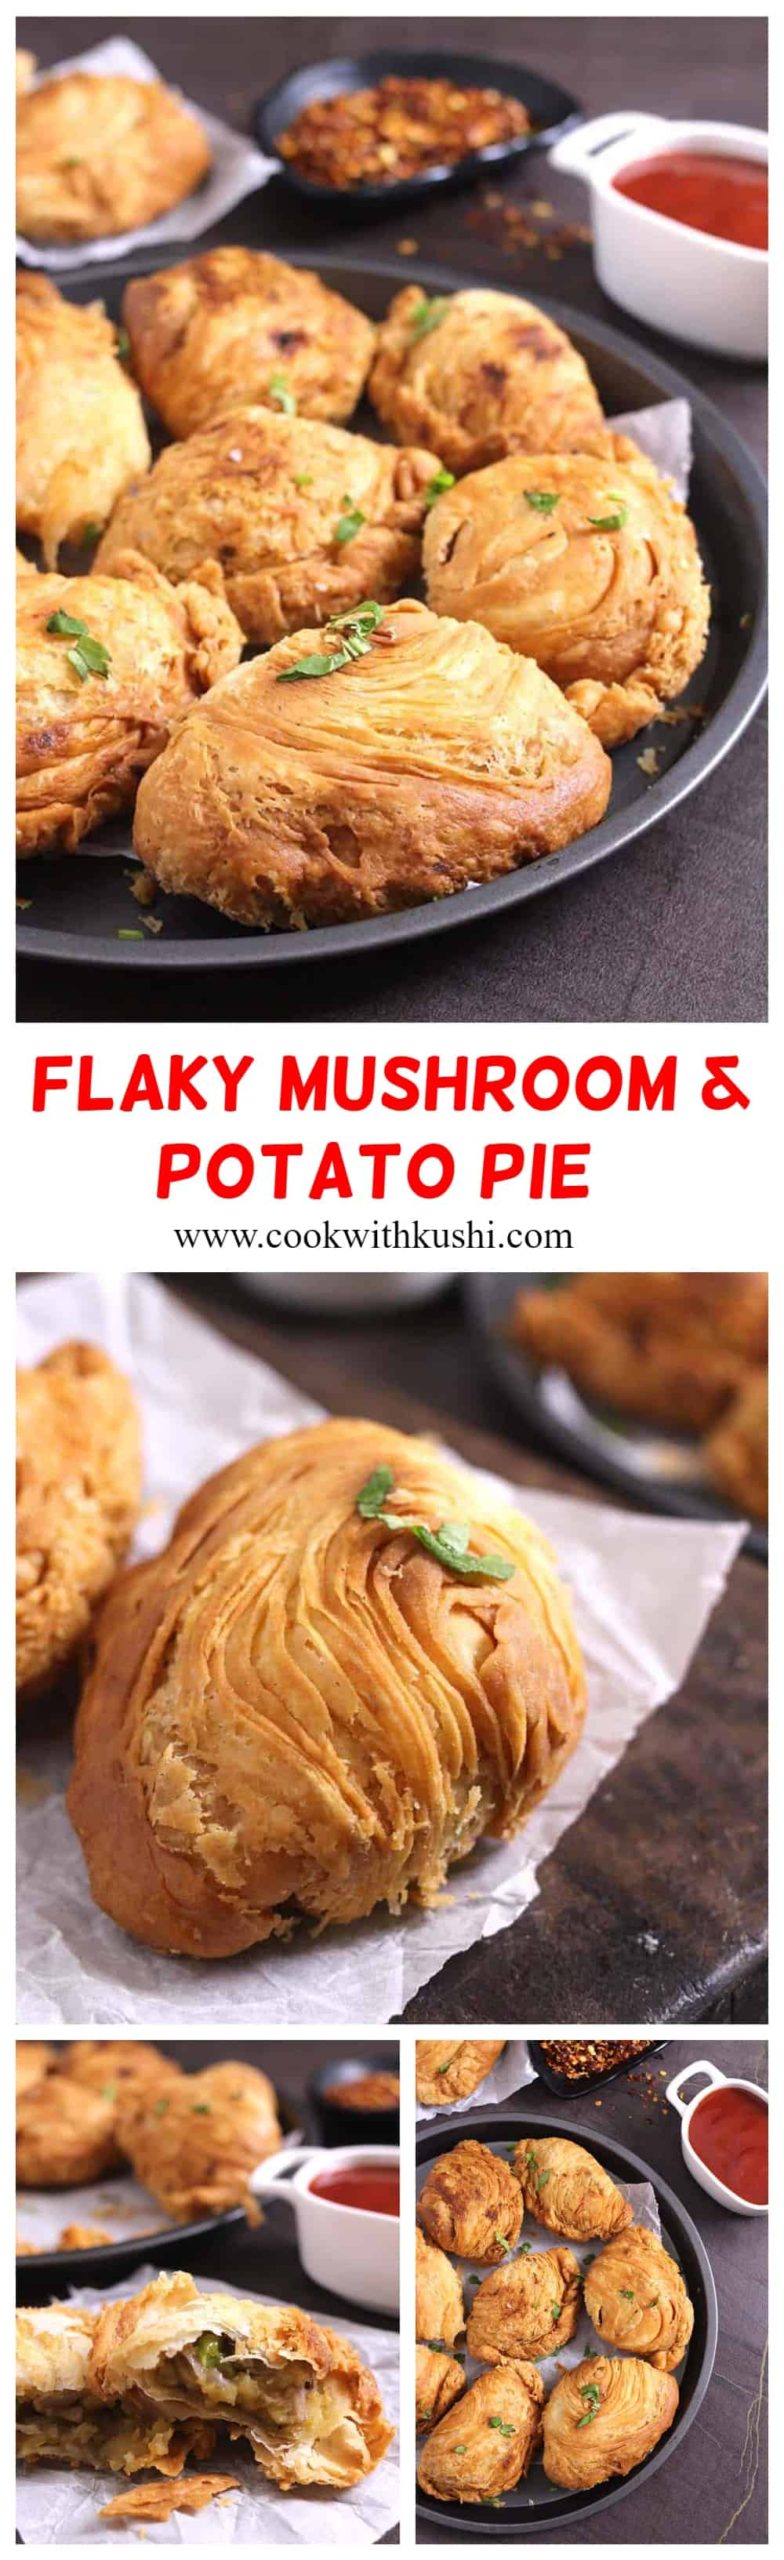 These flaky potato mushroom pie or crispy samosa pastries are delicious, melt in mouth easy to make pastry recipe prepare using few basic ingredients from your kitchen. These can be served as evening snack or appetizer for your lunch or dinner. #puffpastry #samosa #currypuff #karipap #mushroom #Potato #vegetarian